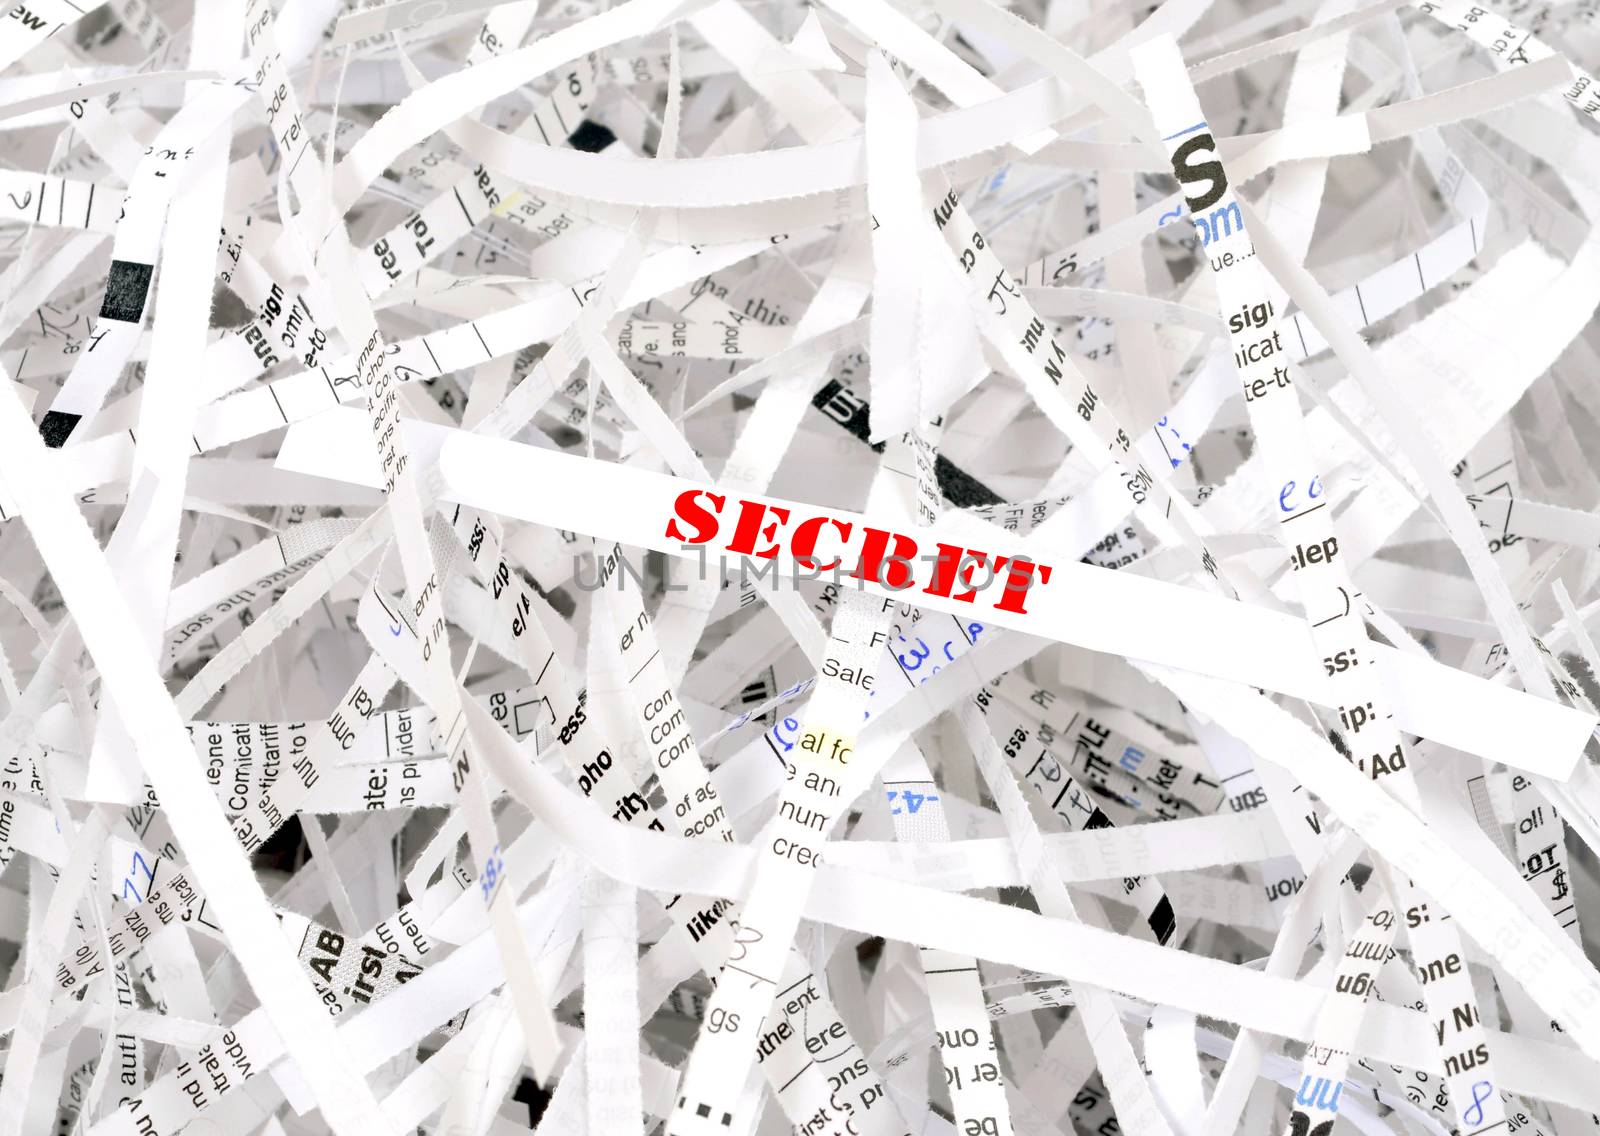 Secret text surrounded by shredded paper. Great concept for information protection